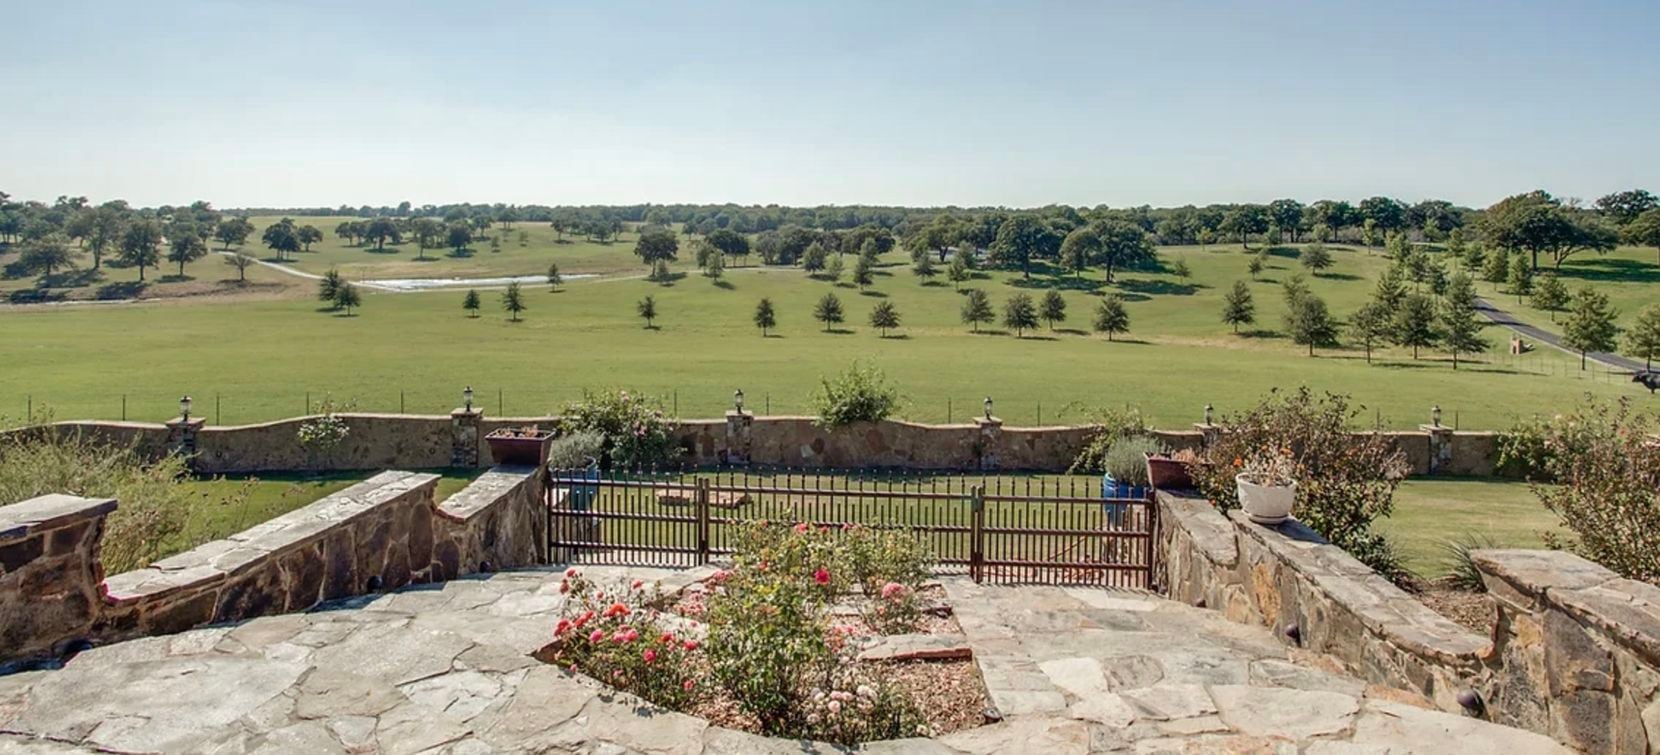 Terry Bradshaw's southern Oklahoma ranch is more than 700 acres.